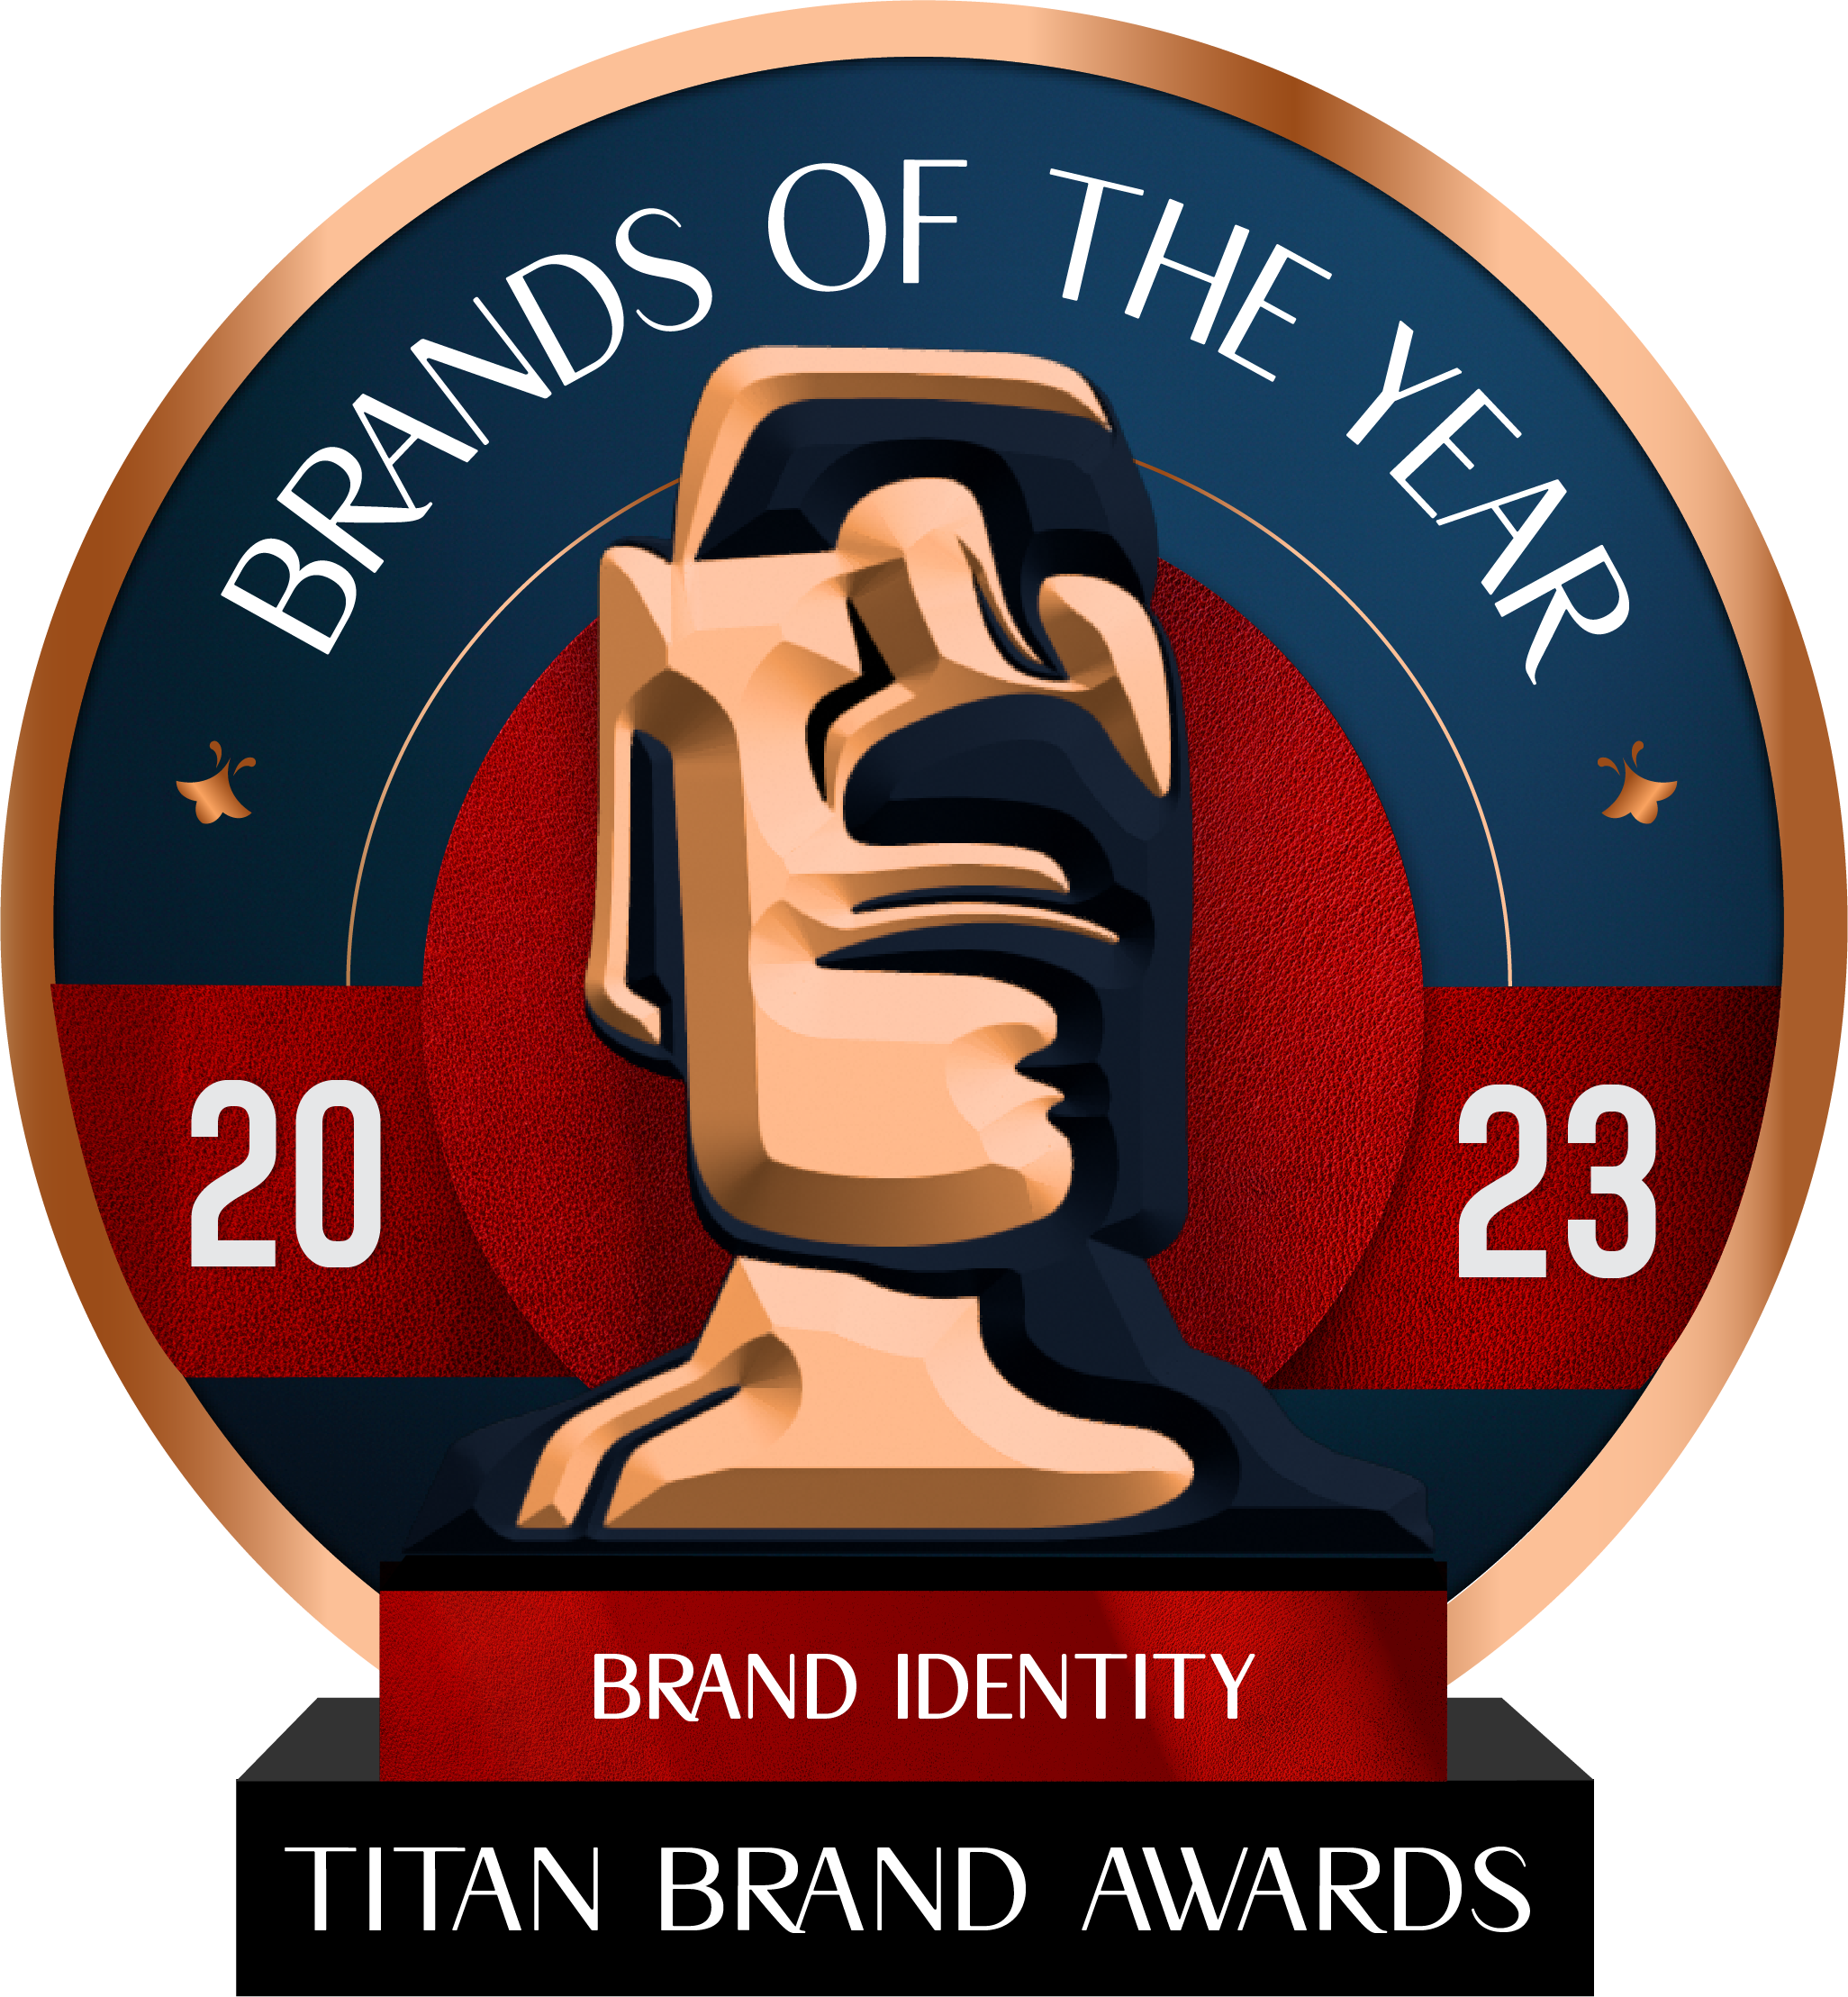 Brand of the Year Awards - Recognizing the best concepts and designs of brands worldwide. 